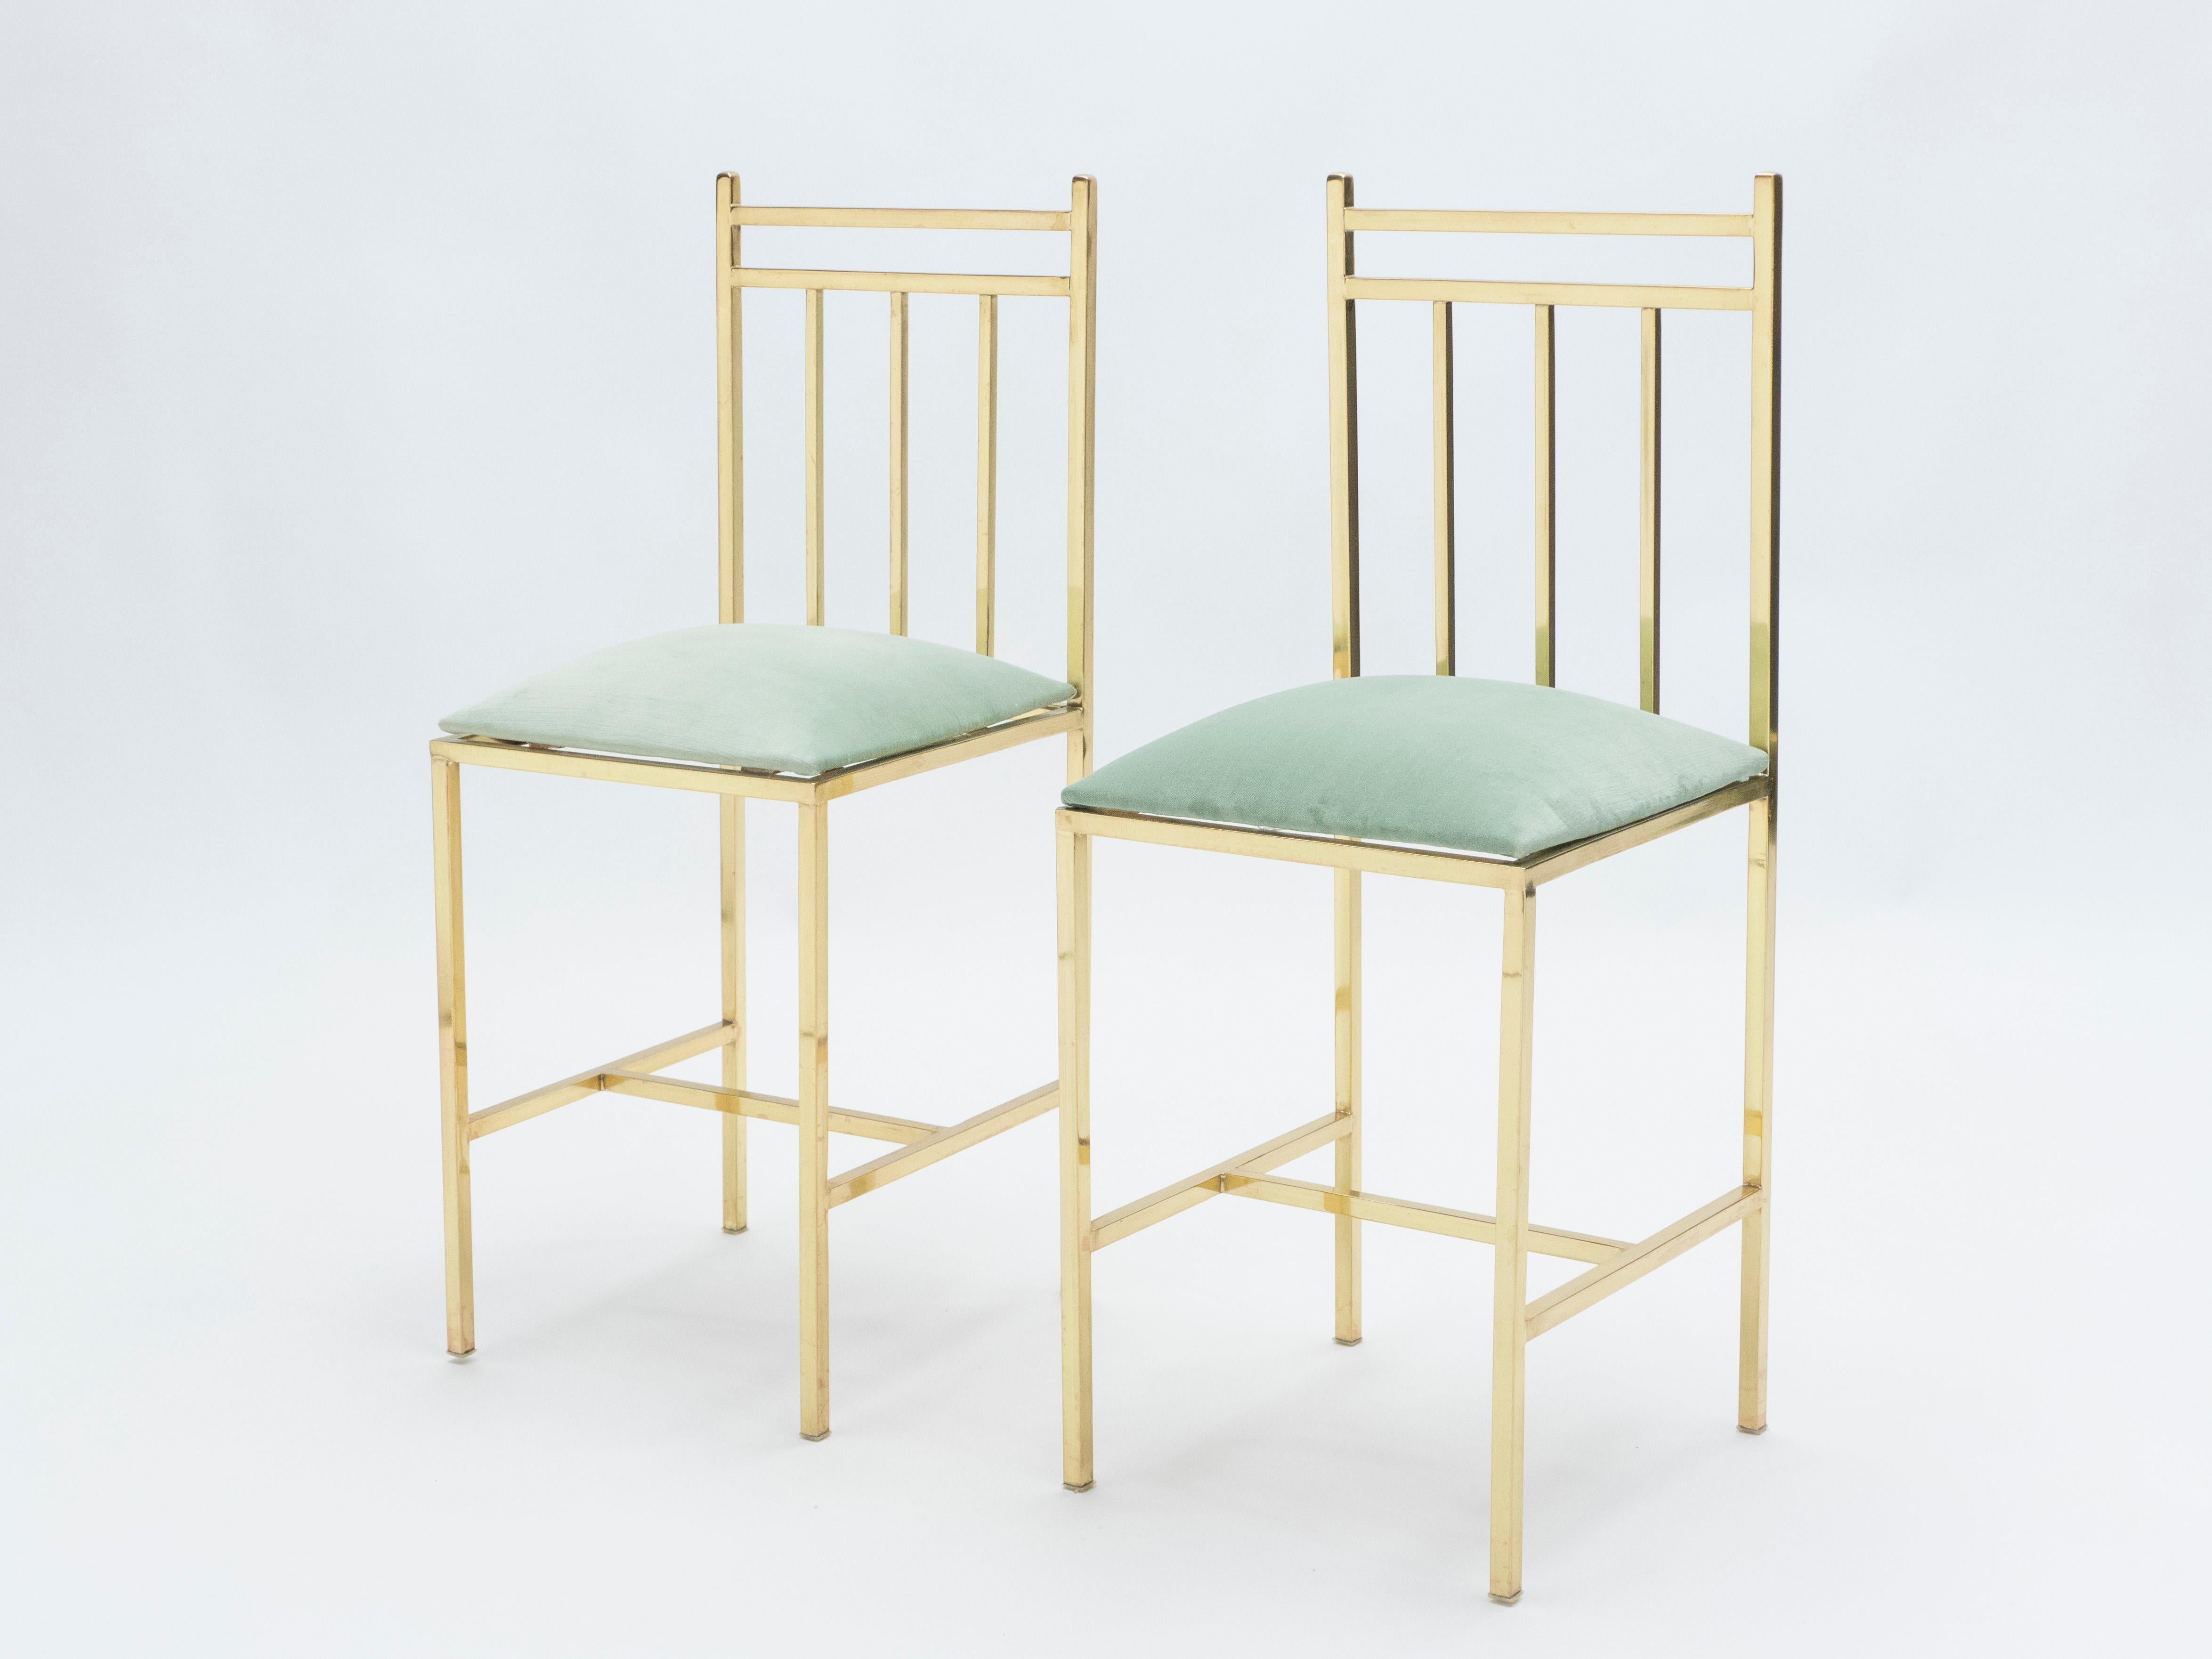 French Rare Pair of Brass Child's Chairs Attributed to Marc Du Plantier, 1960s For Sale